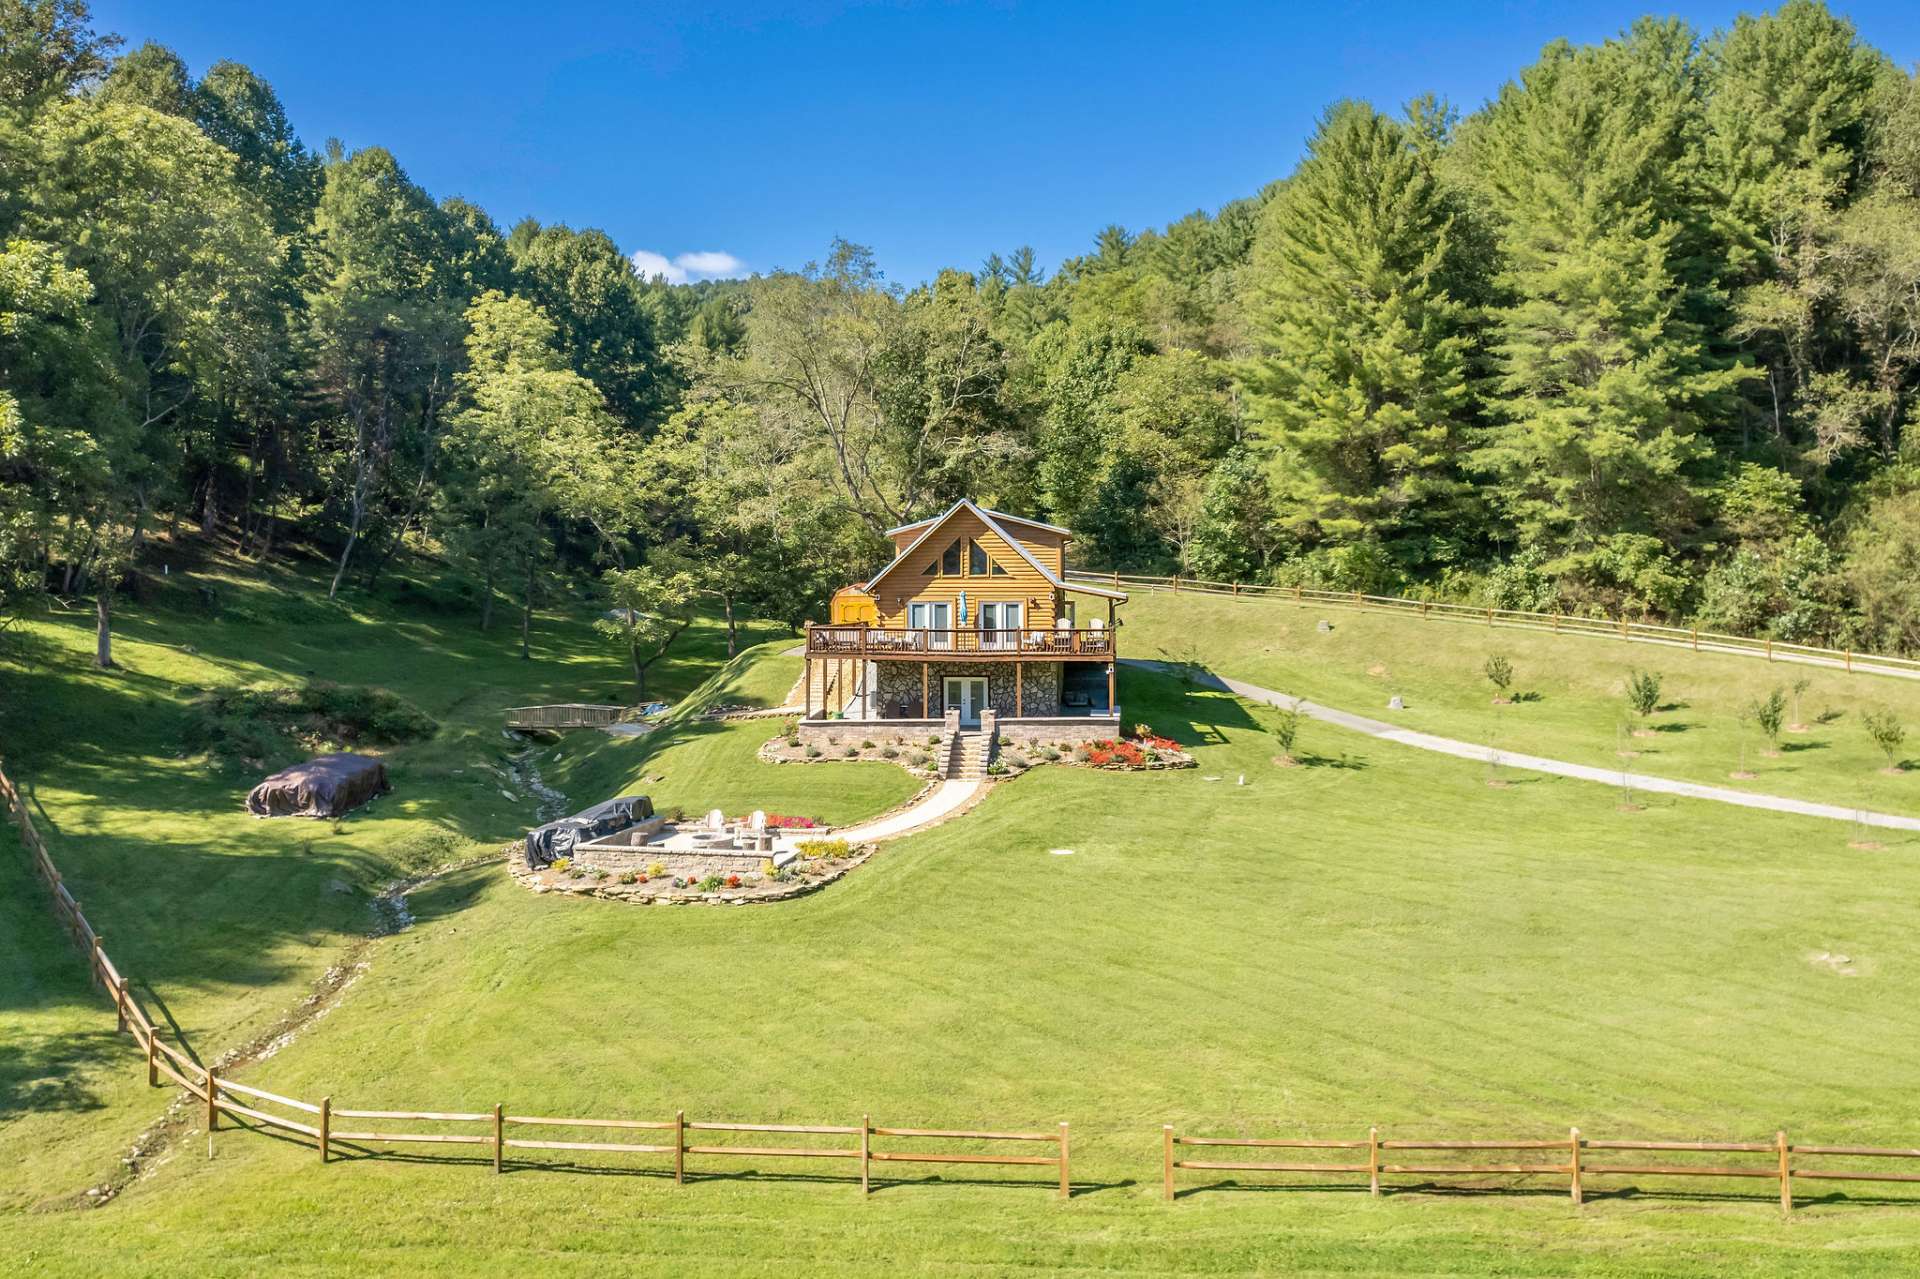 This charming 3-bedroom, 3-bath log cabin is nestled among a 2.44 acre park-like setting in NC Dreams, a private community in the Grassy Creek area of Ashe County.